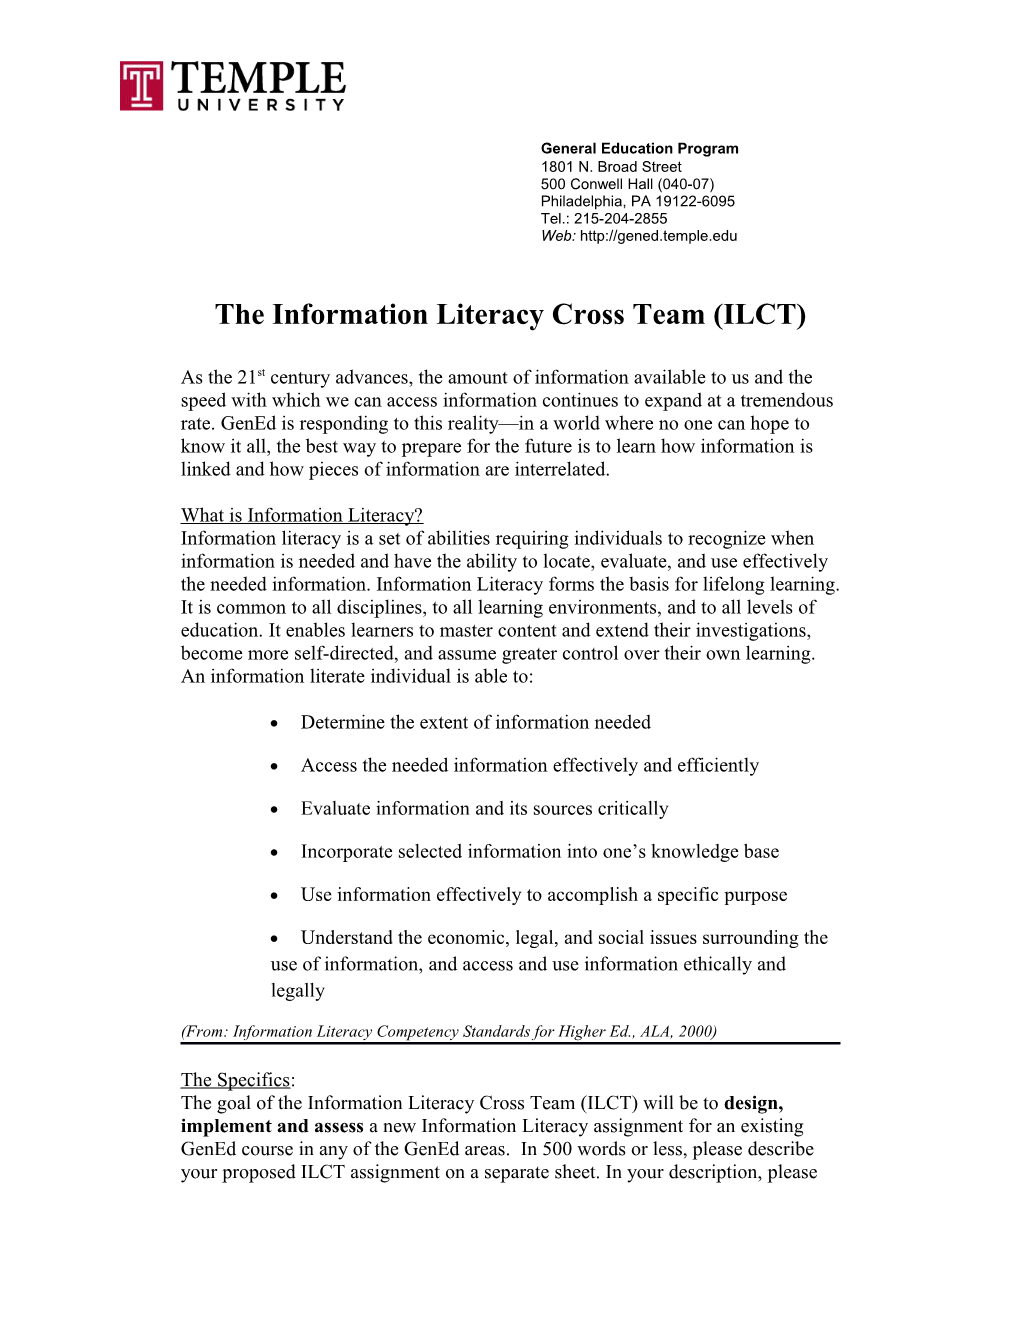 The Information Literacy Cross Team (ILCT)